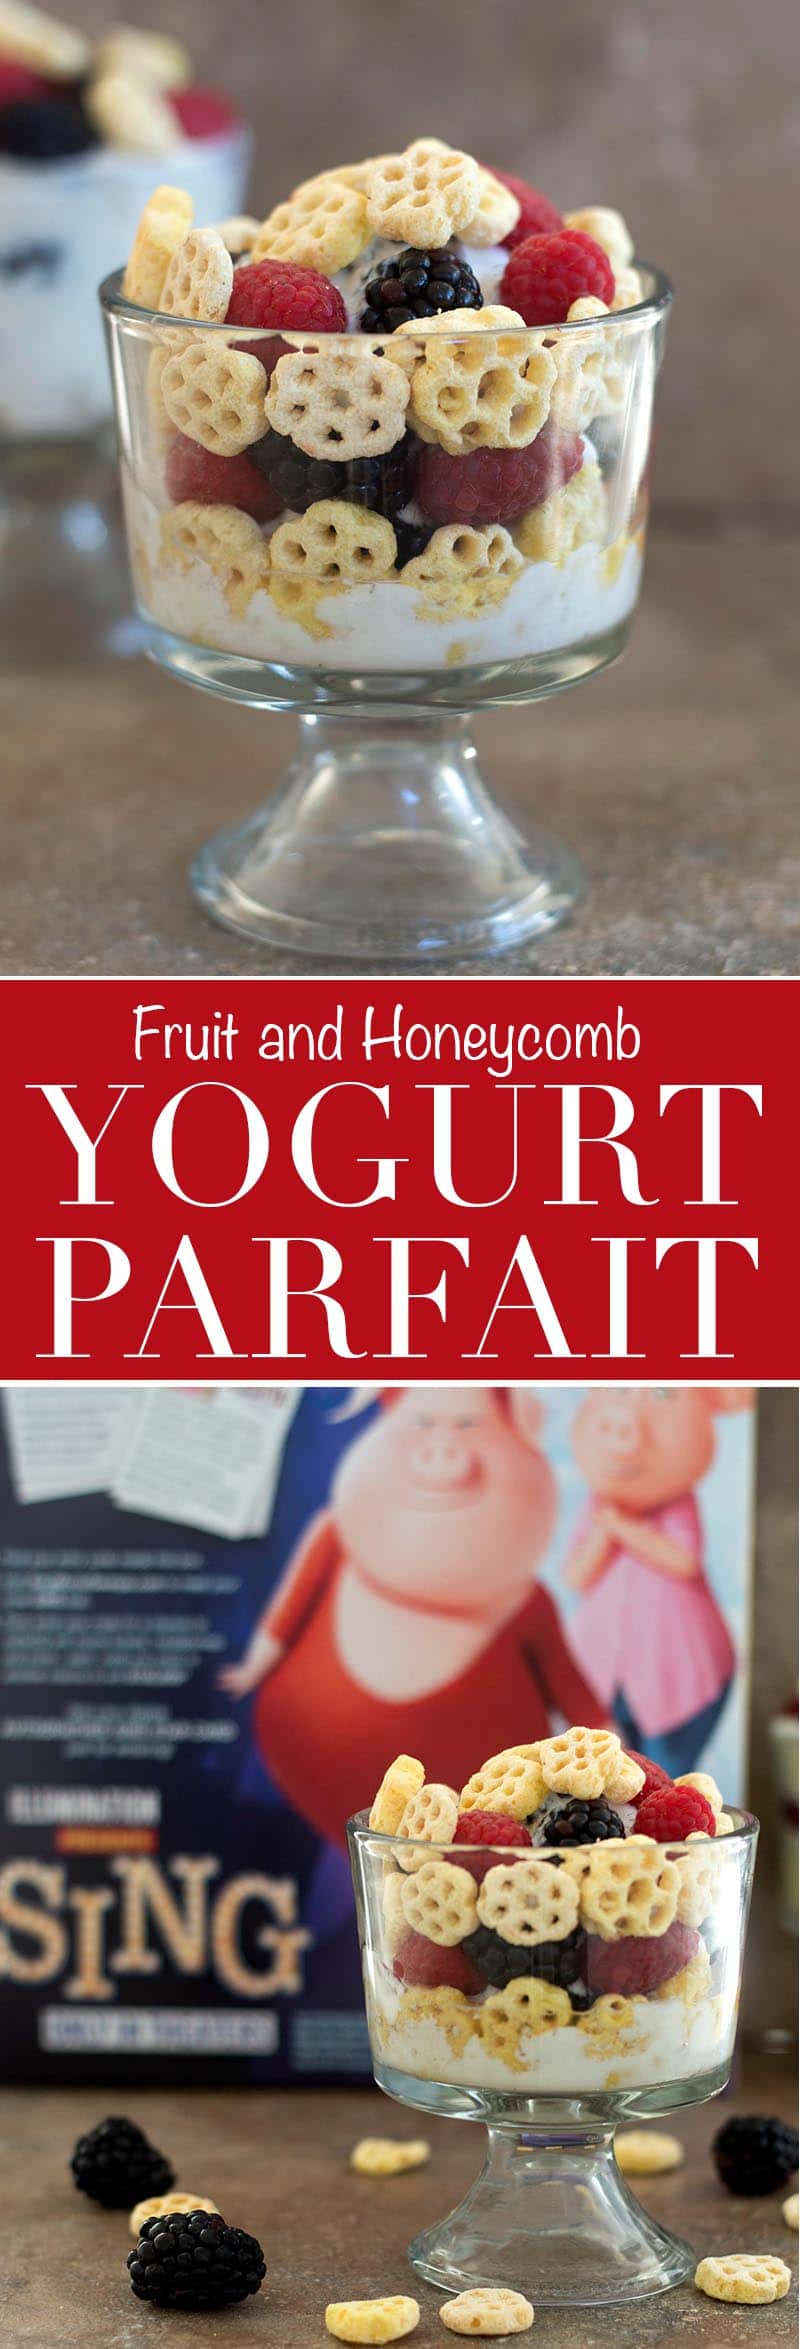 Yogurt Parfait - Quick and easy kid snack made with fresh fruits and honeycomb cereal. Takes only 5 minutes to make. Use fresh fruits and yogurt for a very nutritious snack.